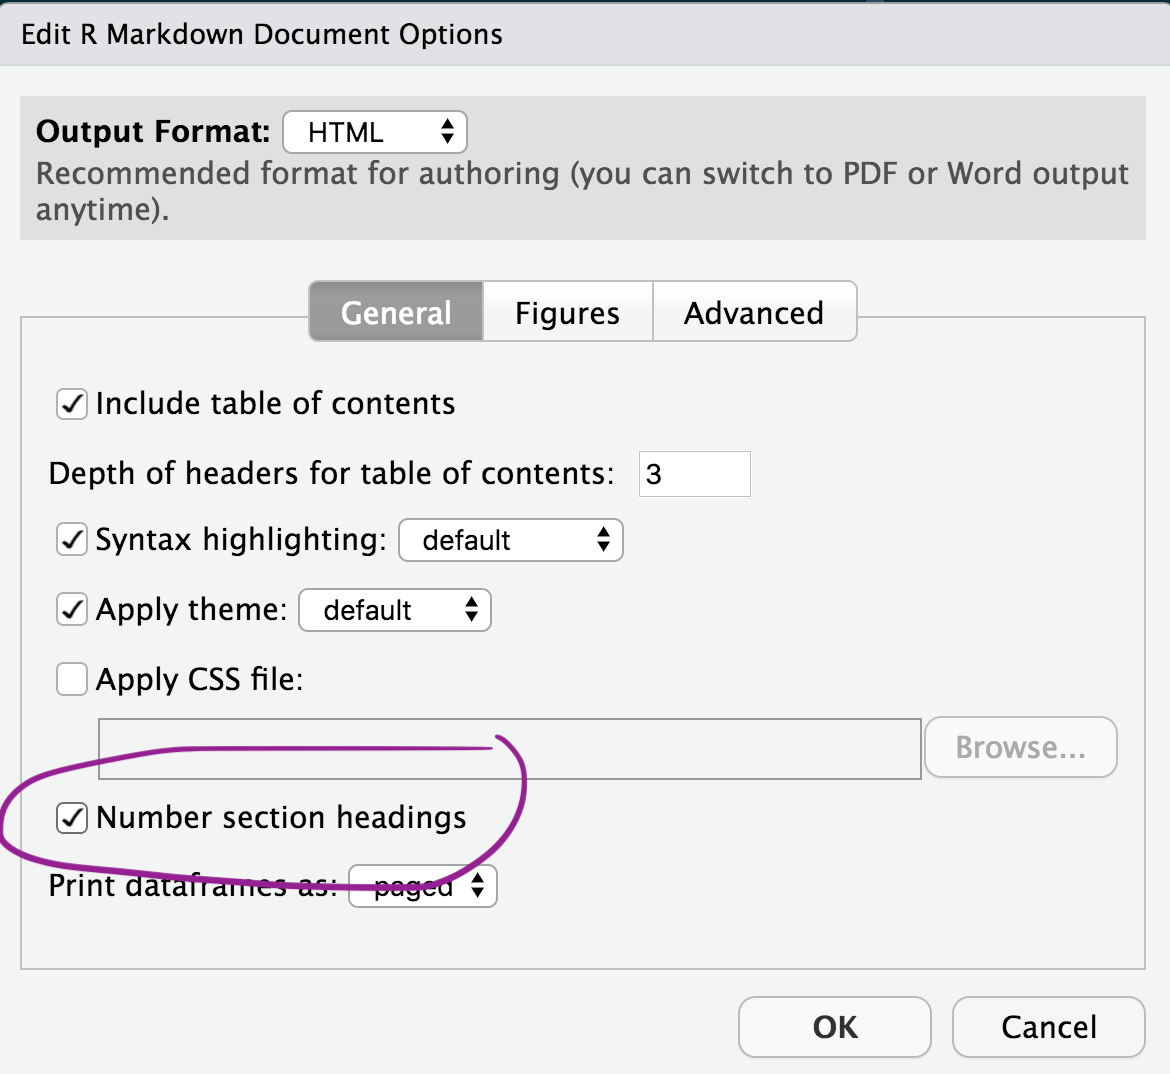 Image showing the “Number section headings” option selected and circled